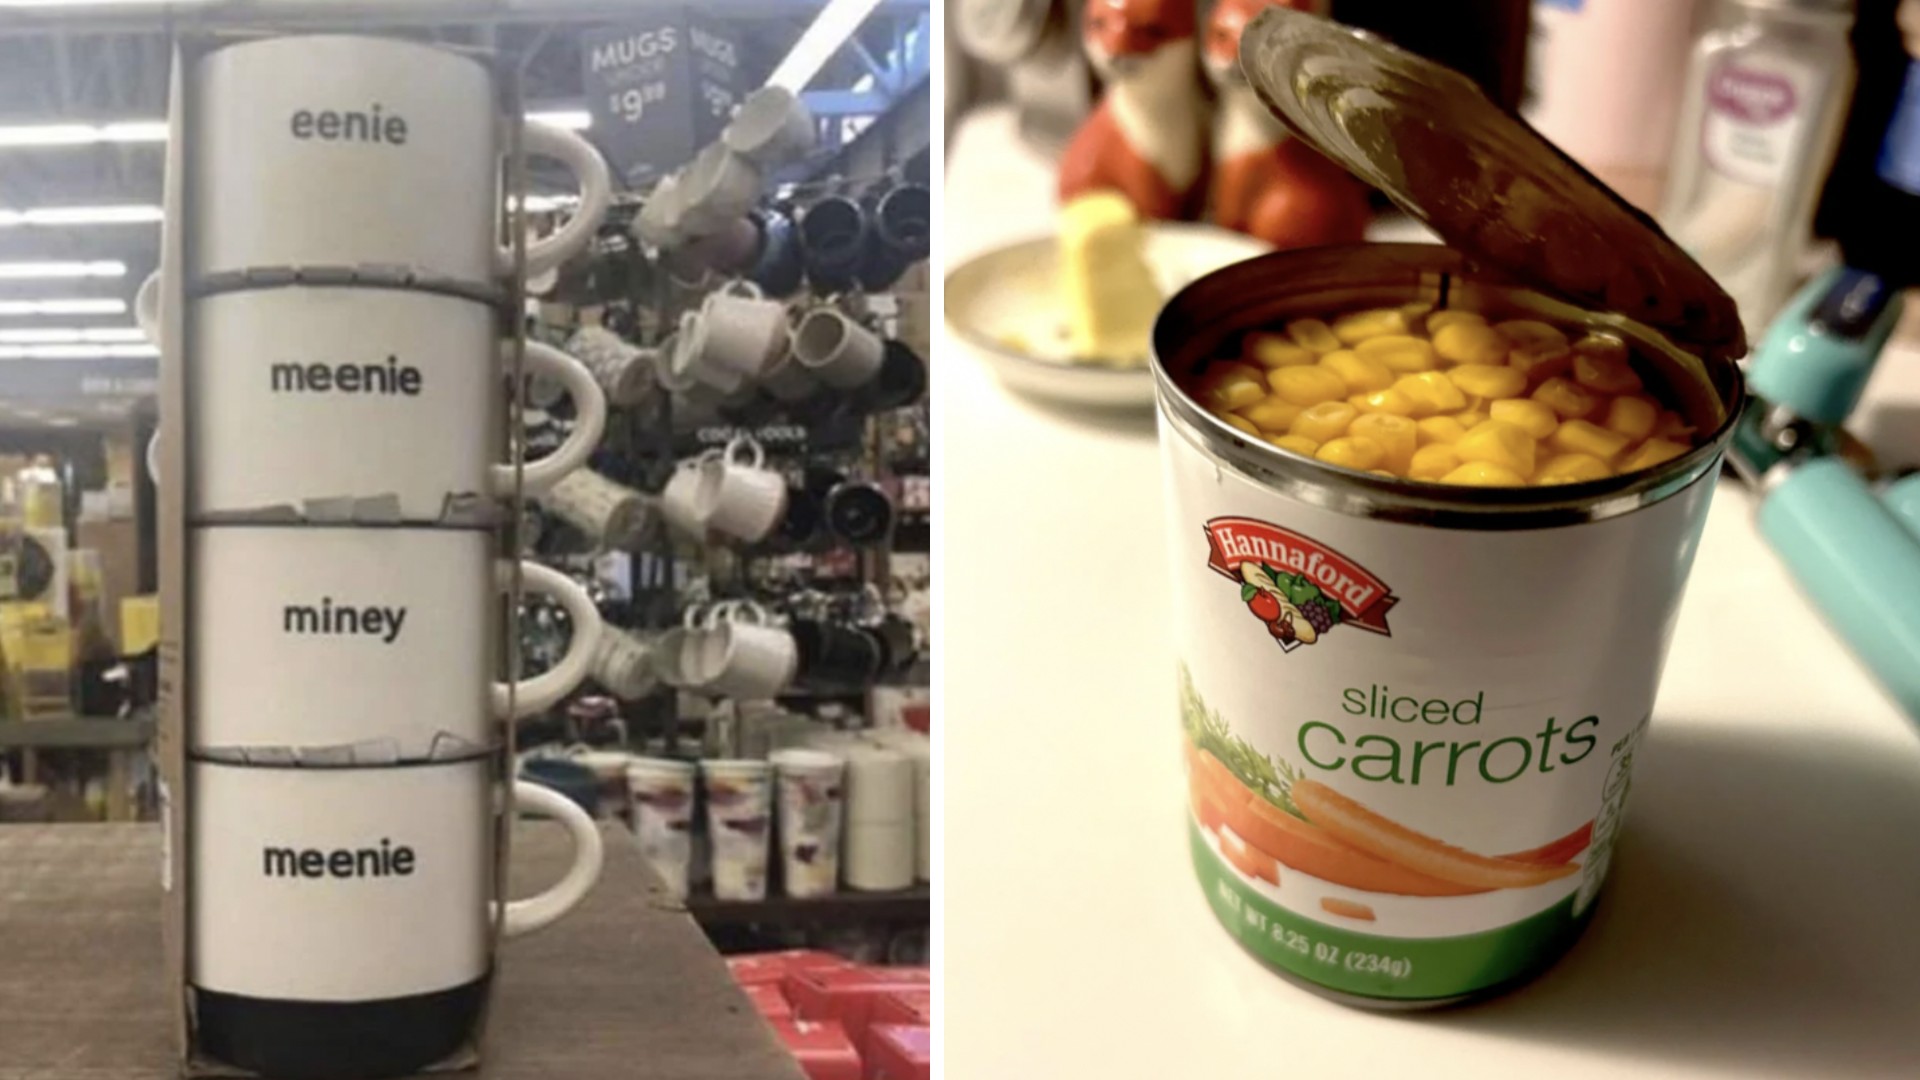 On the left, a display of stacked white mugs labeled "eenie," "meenie," "miney," and "meenie." On the right, an open can of "sliced carrots" clearly filled with corn kernels instead of carrots.